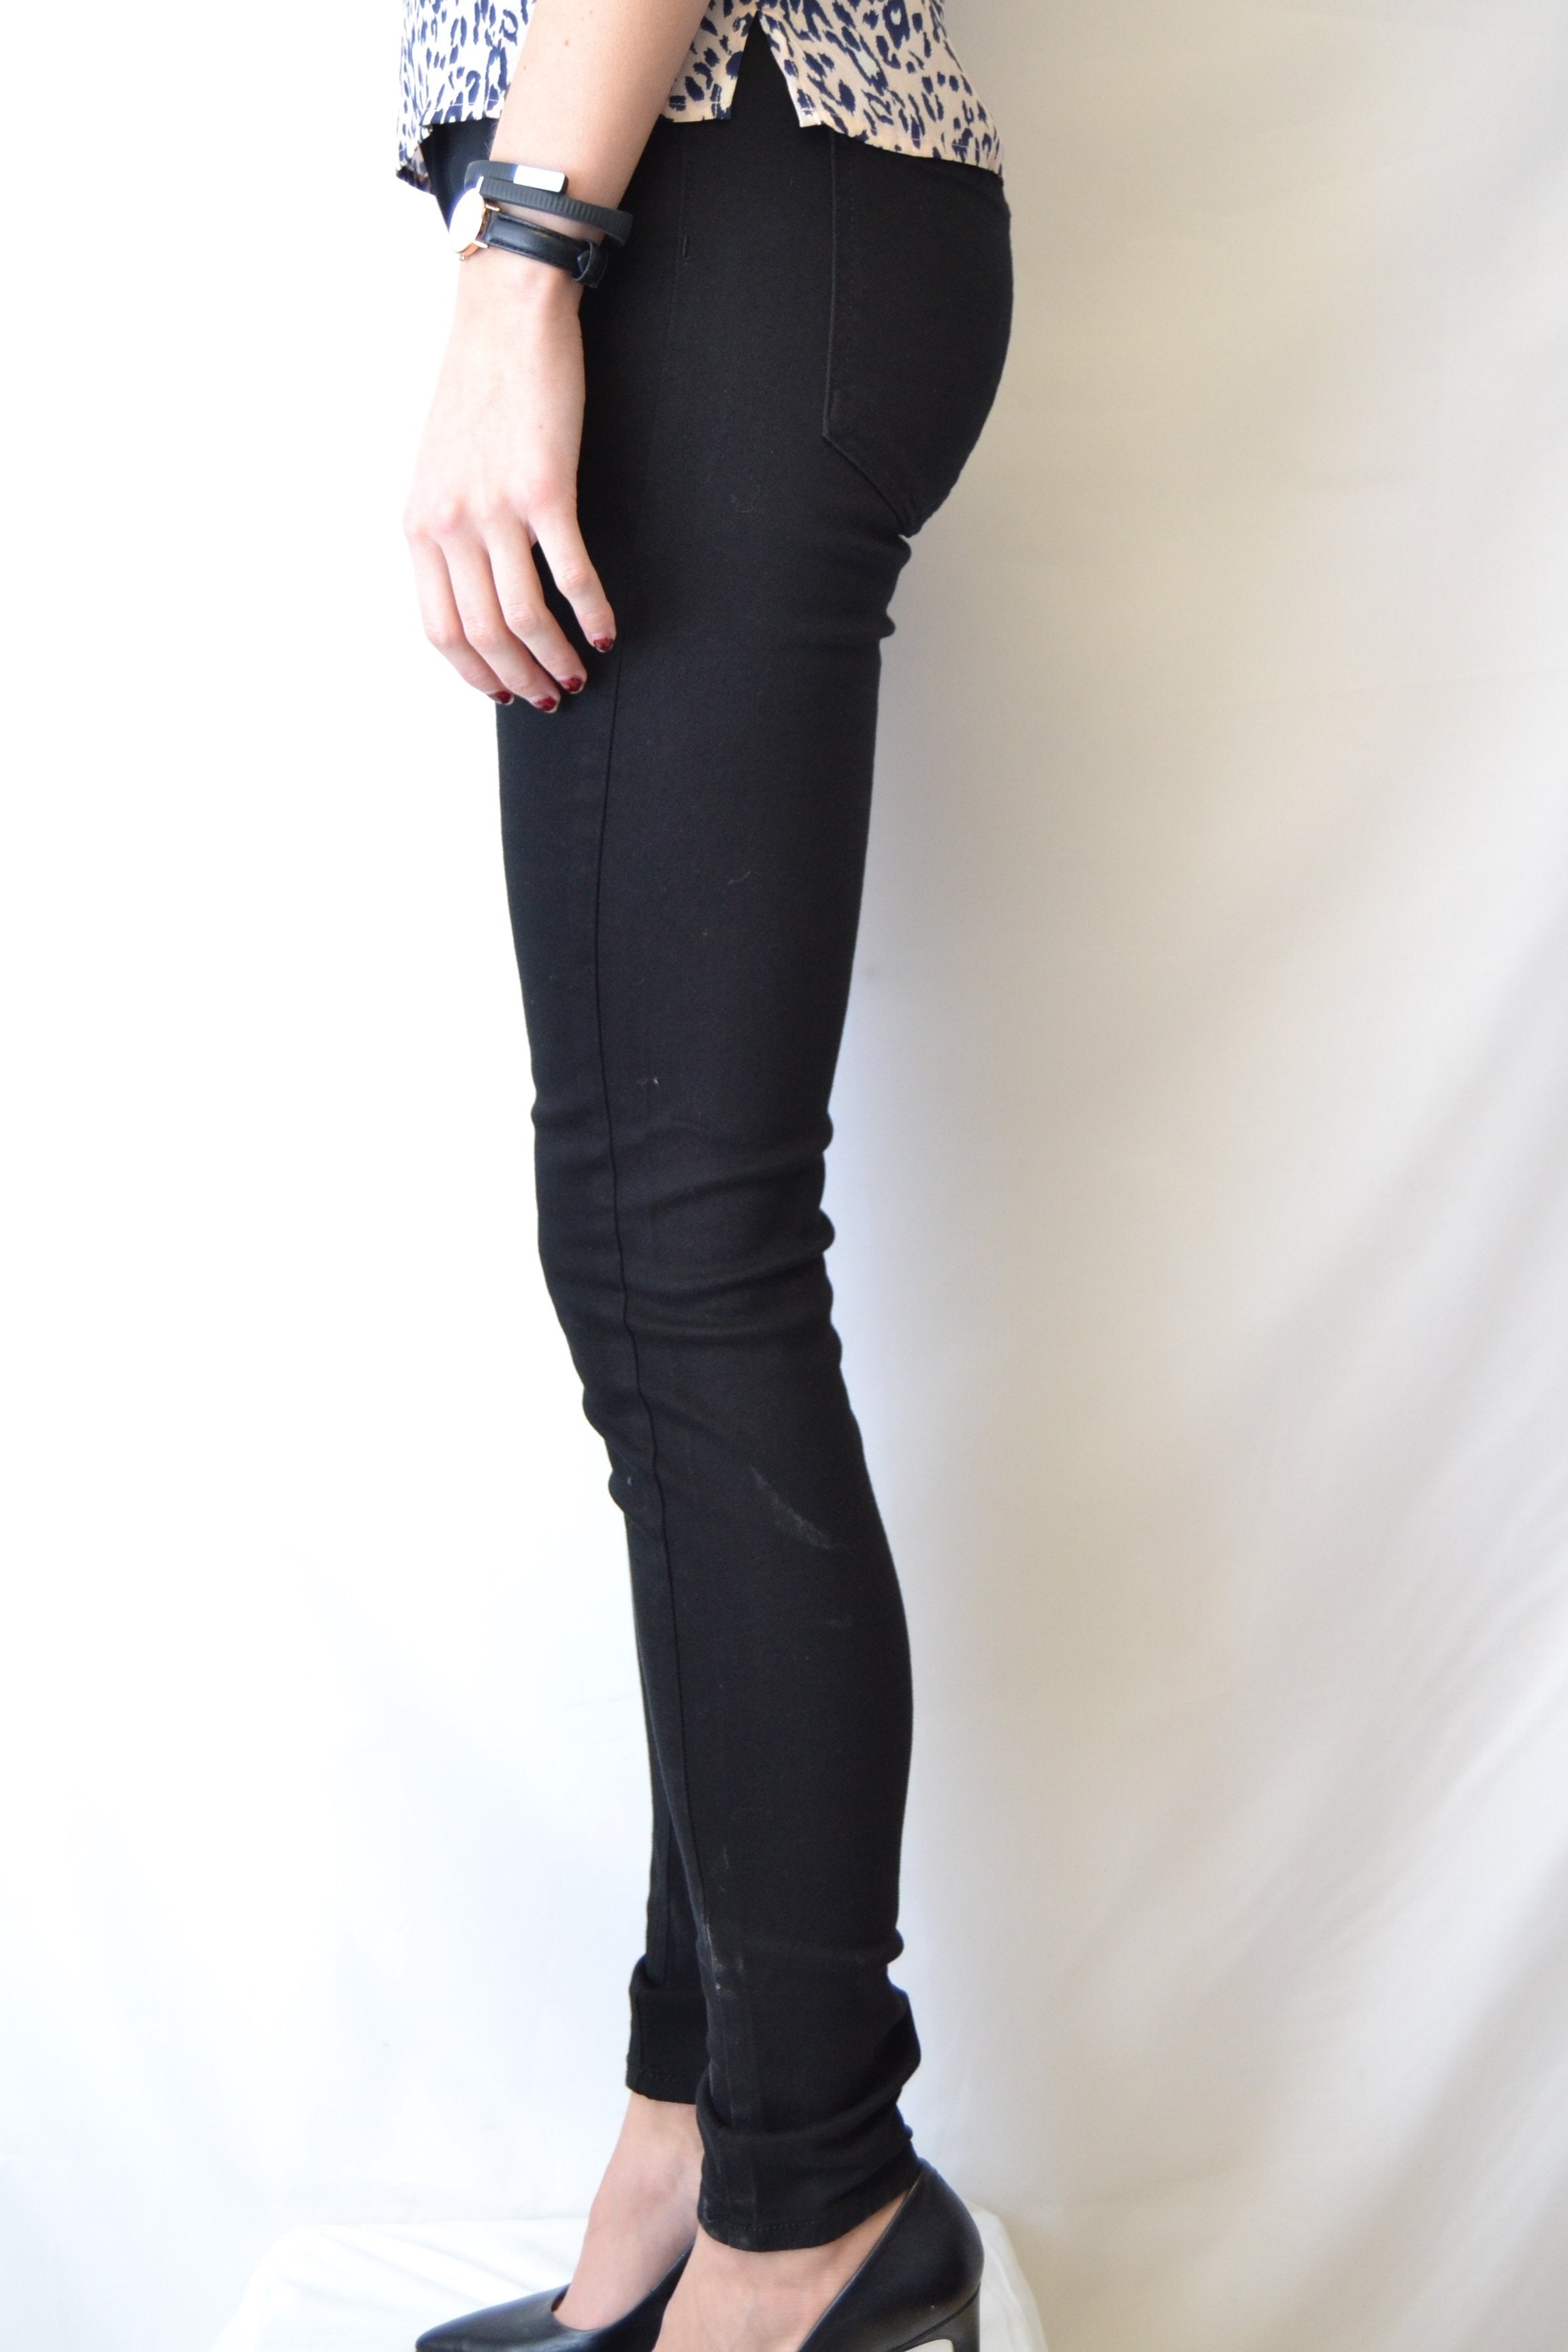 Just Female Stroke Jeans black twill - Mojo Independent Store